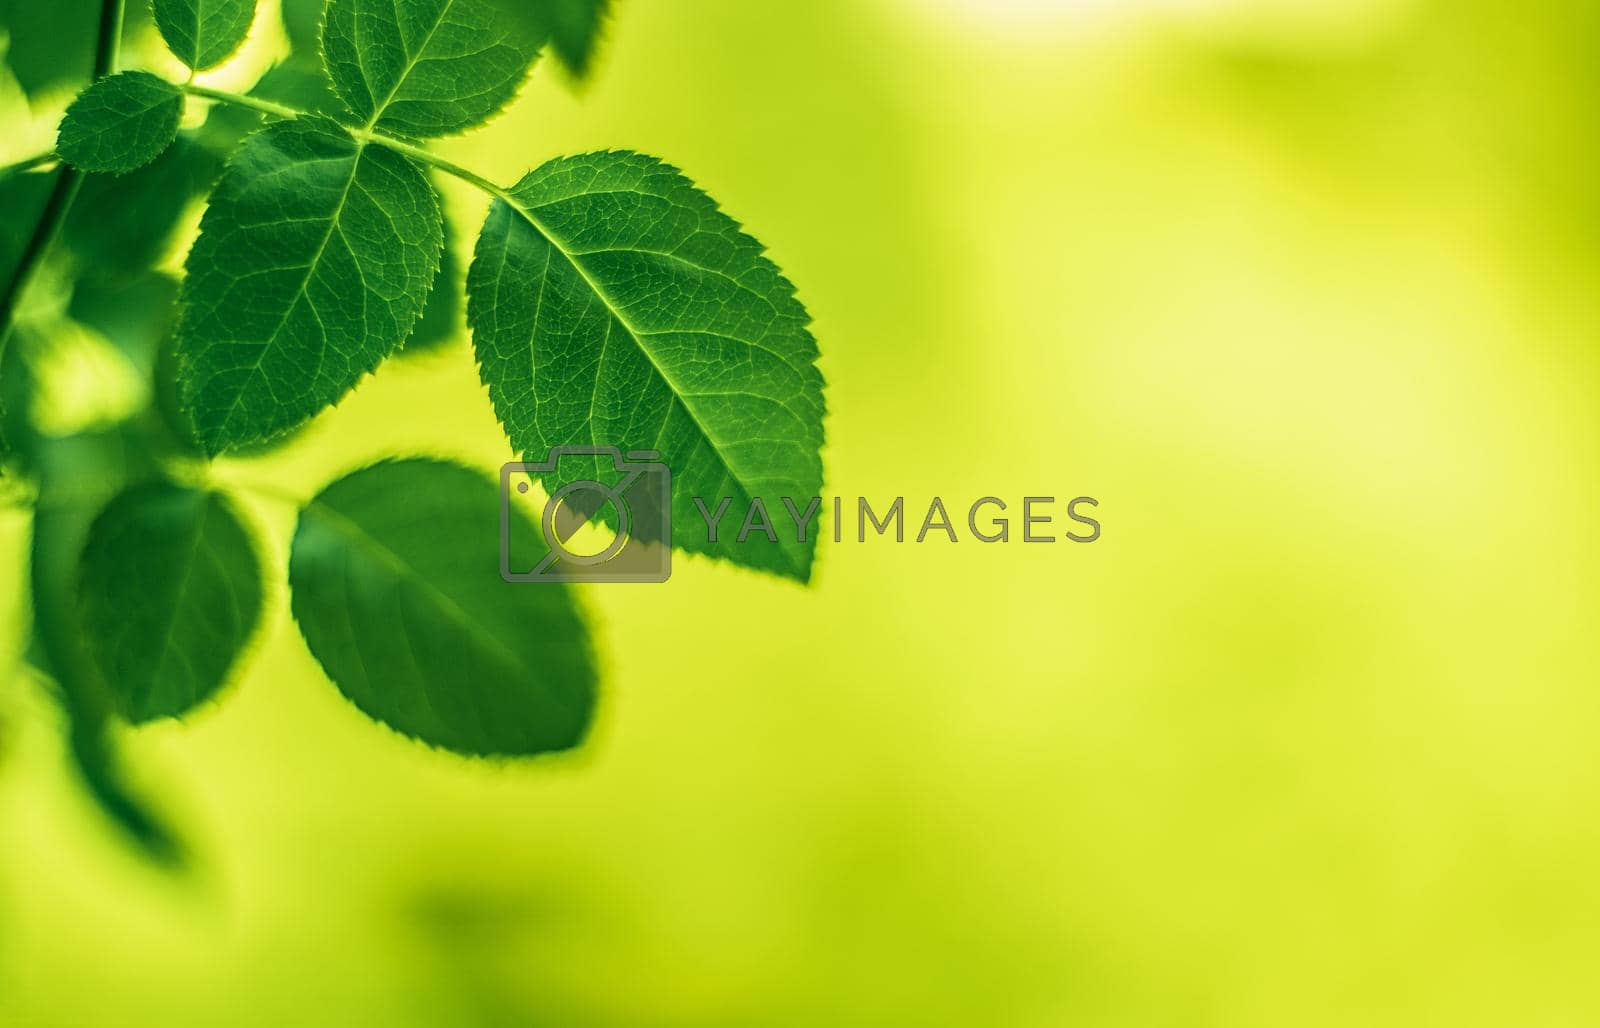 Royalty free image of The best time to plant a tree is now by Anneleven